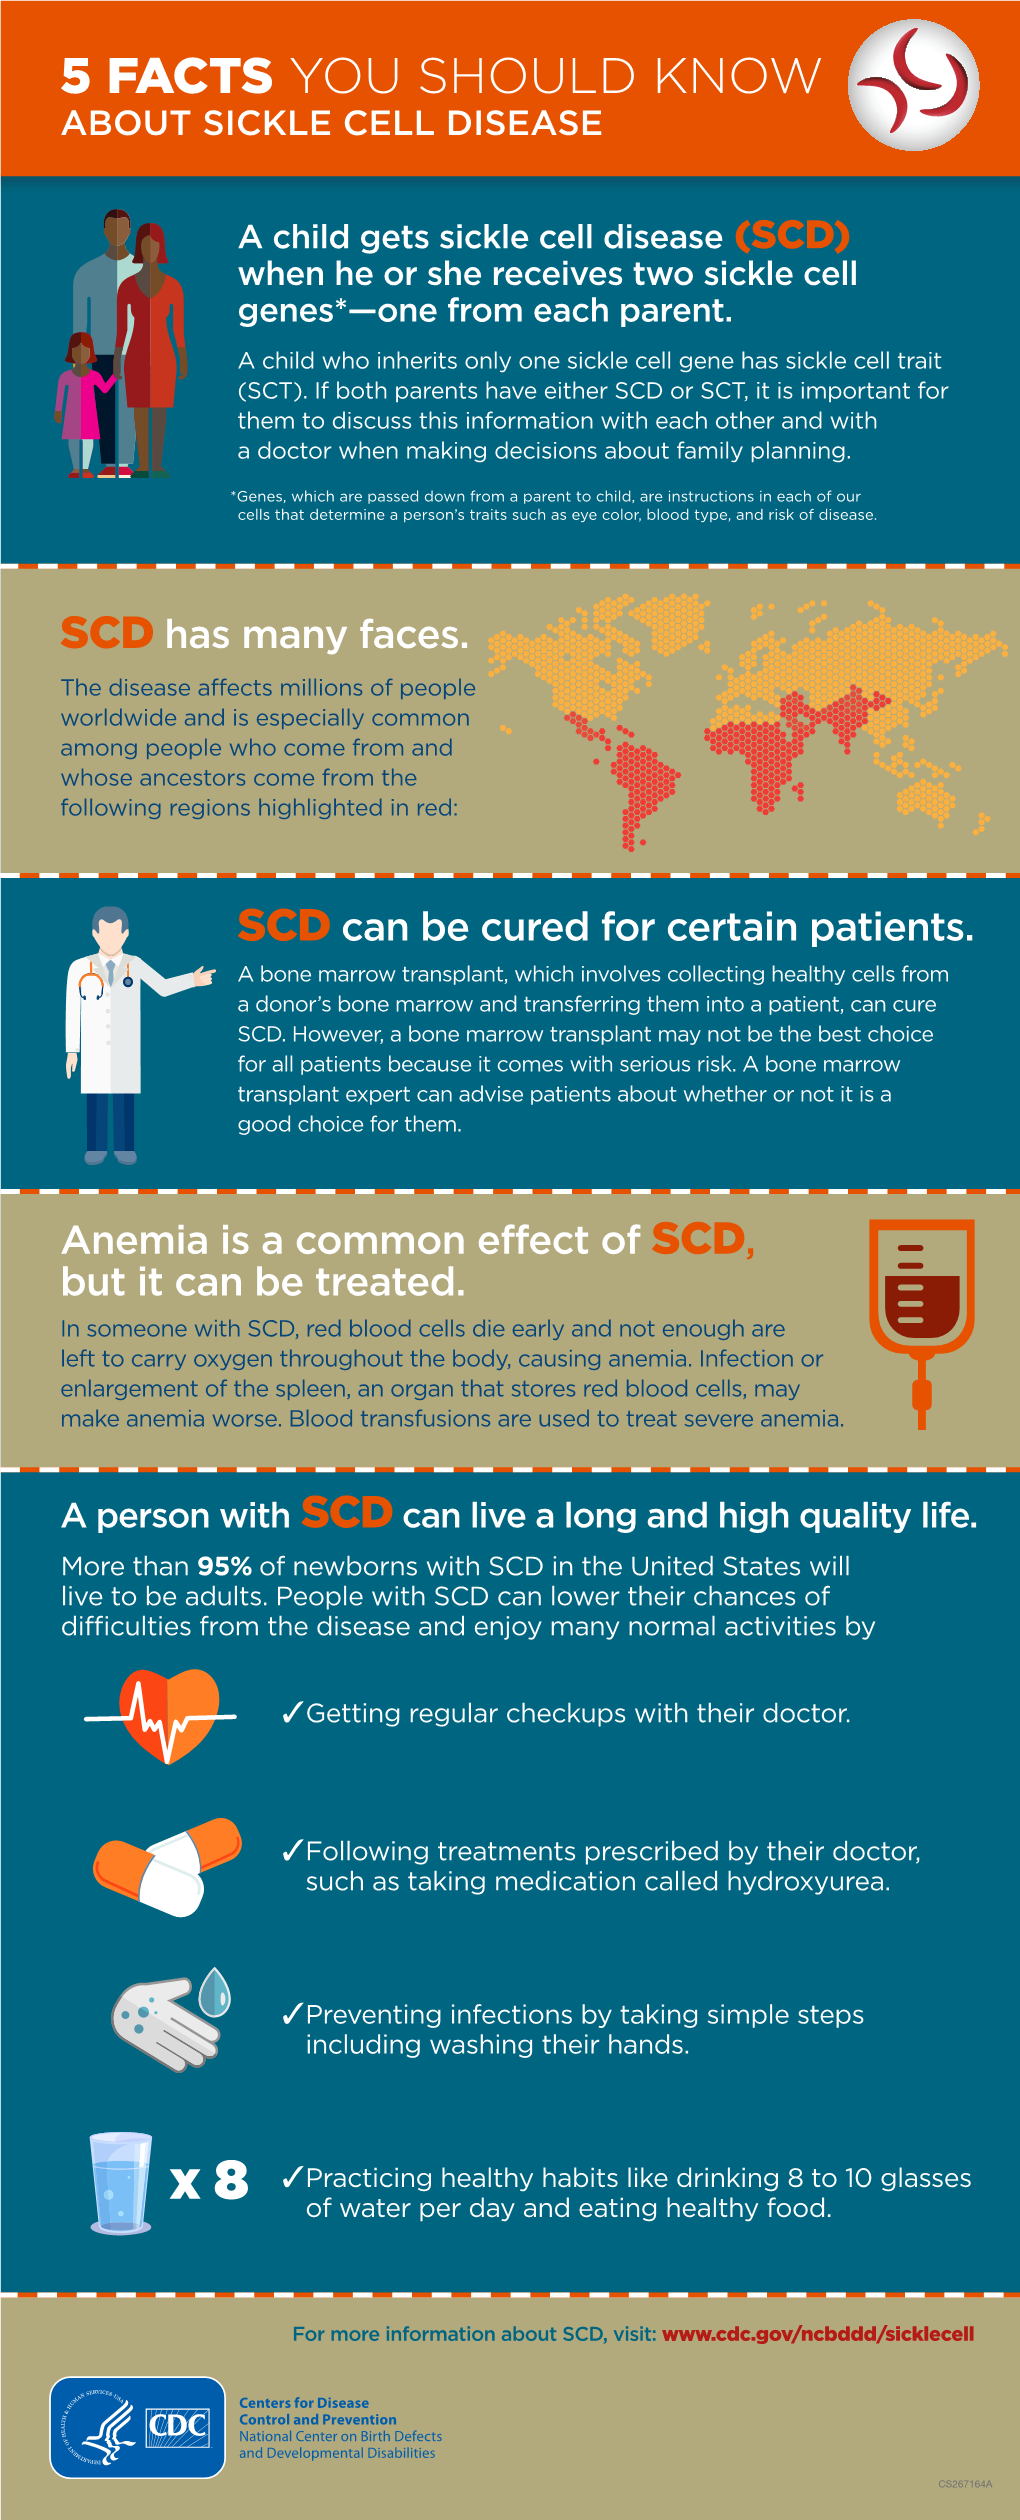 5 Facts You Should Know About Sickle Cell Disease